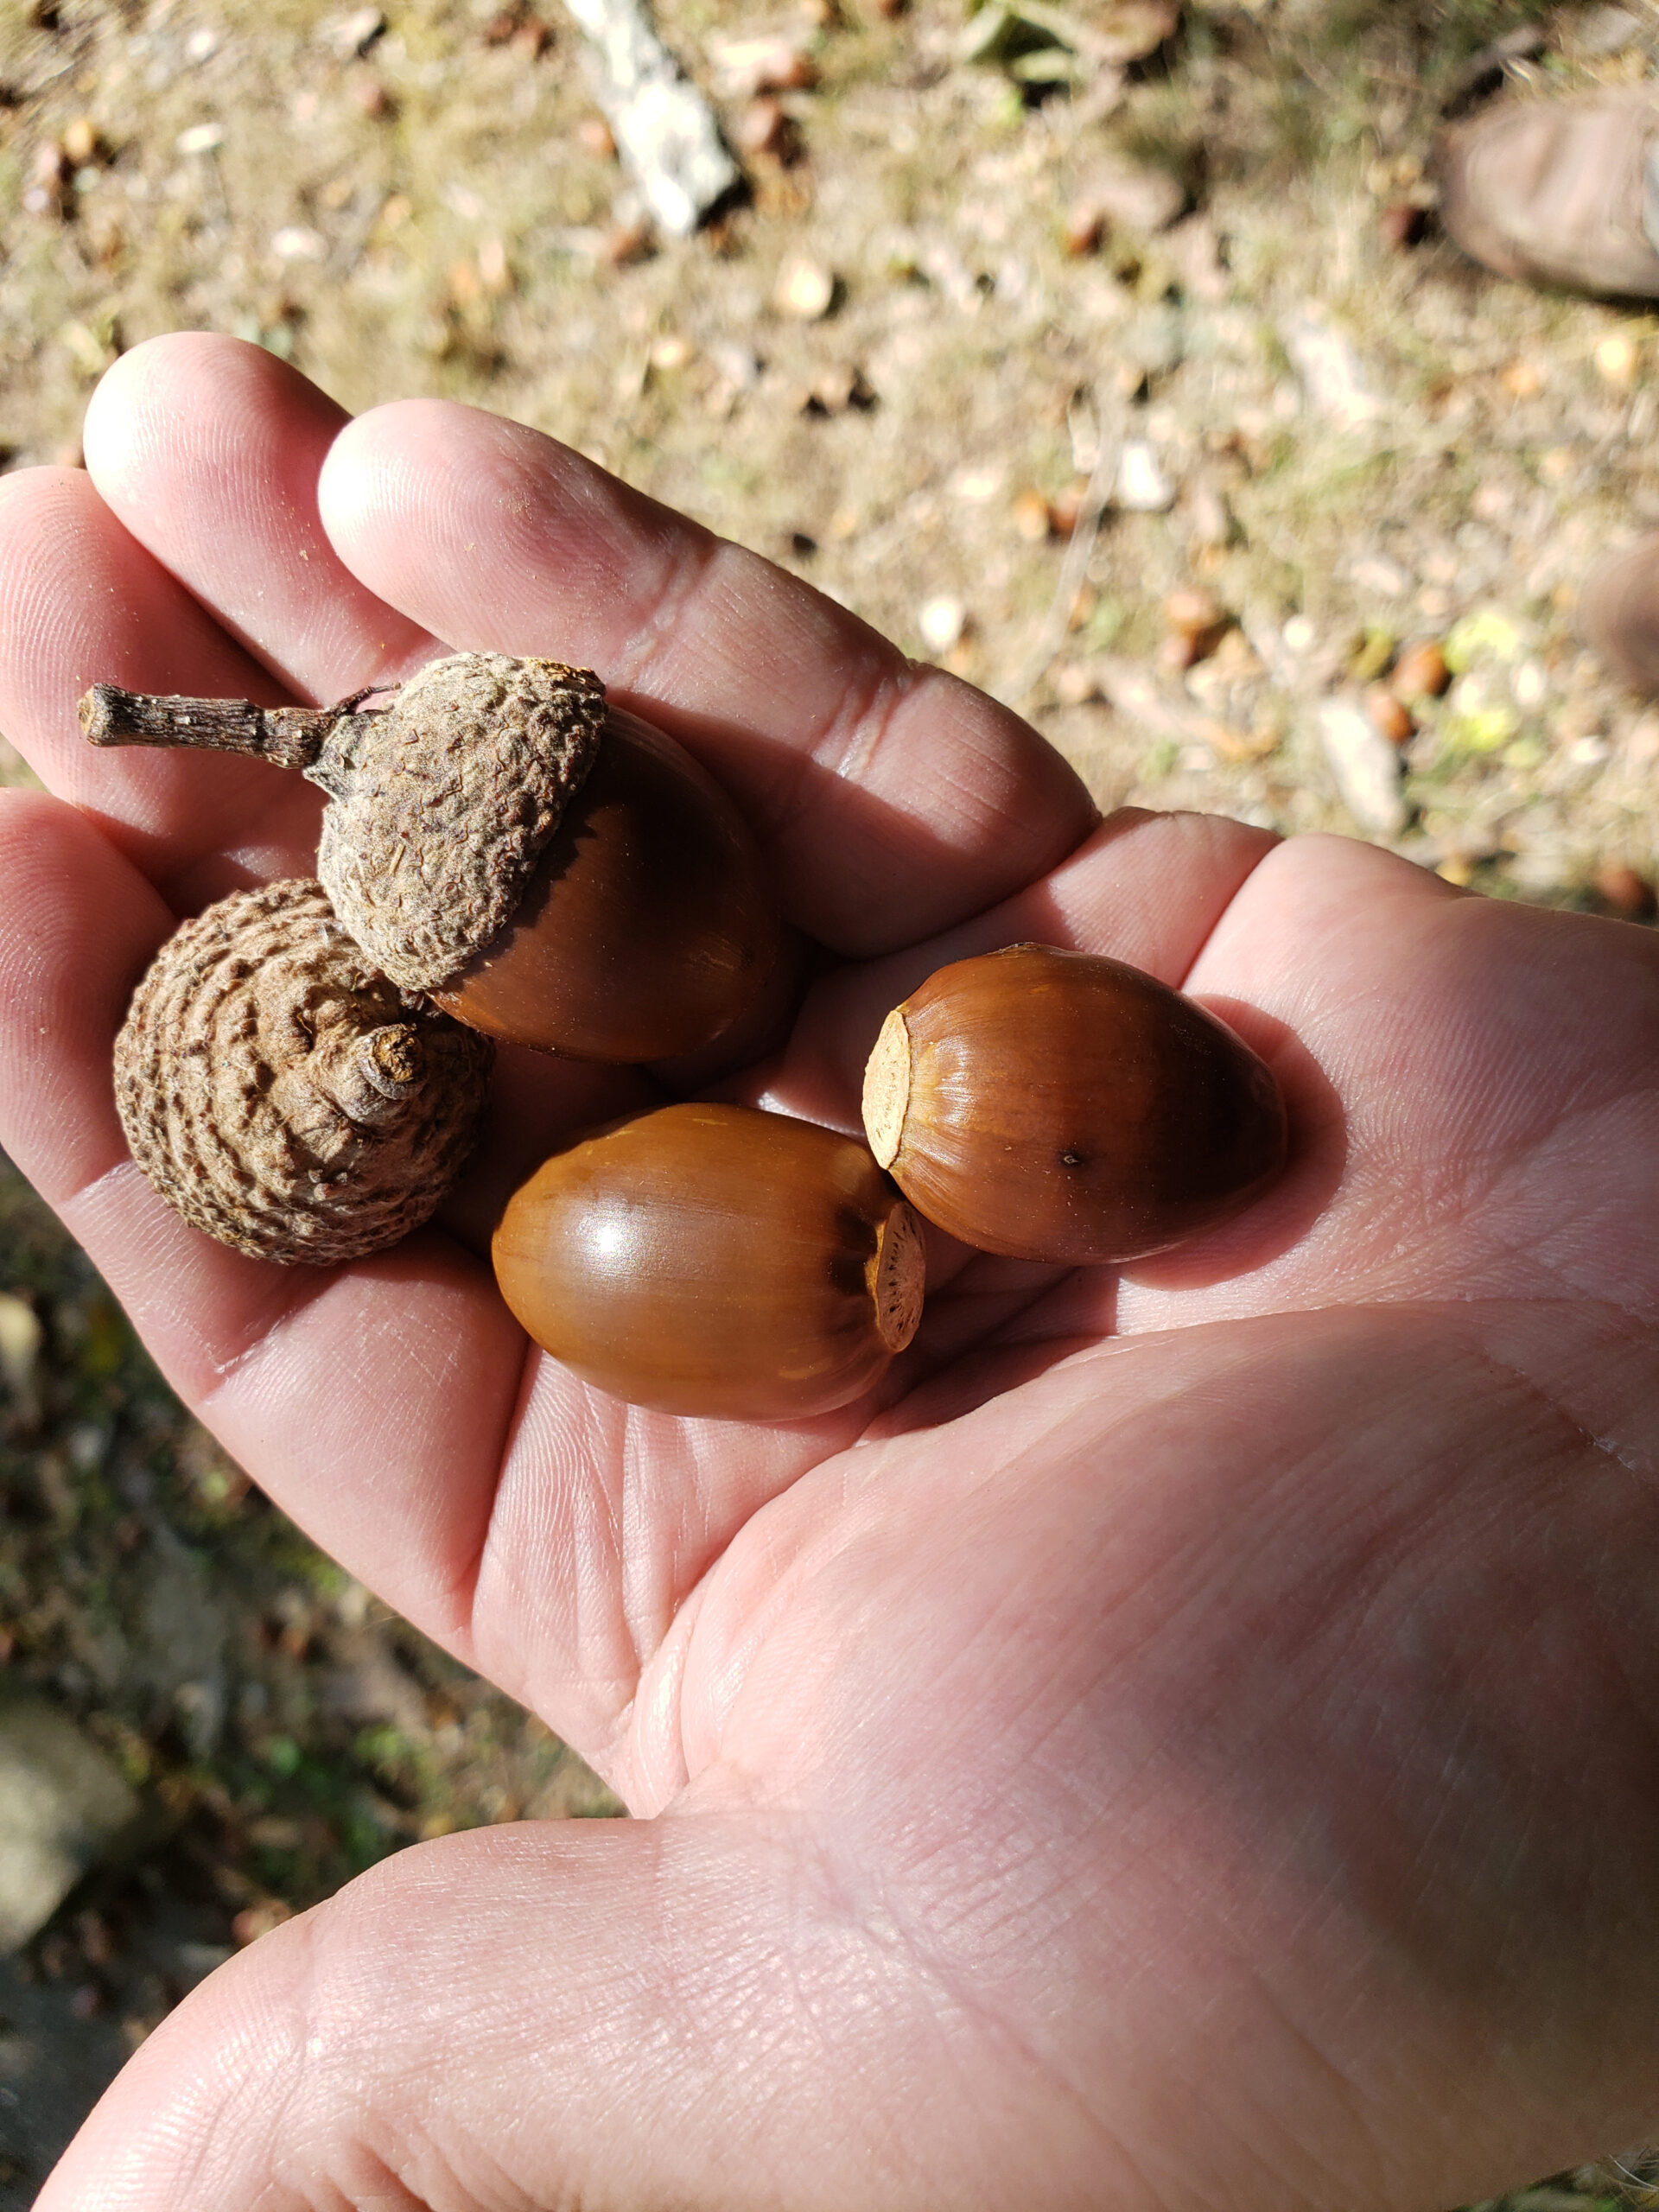 Question Why Are There so Many Acorns This Year?